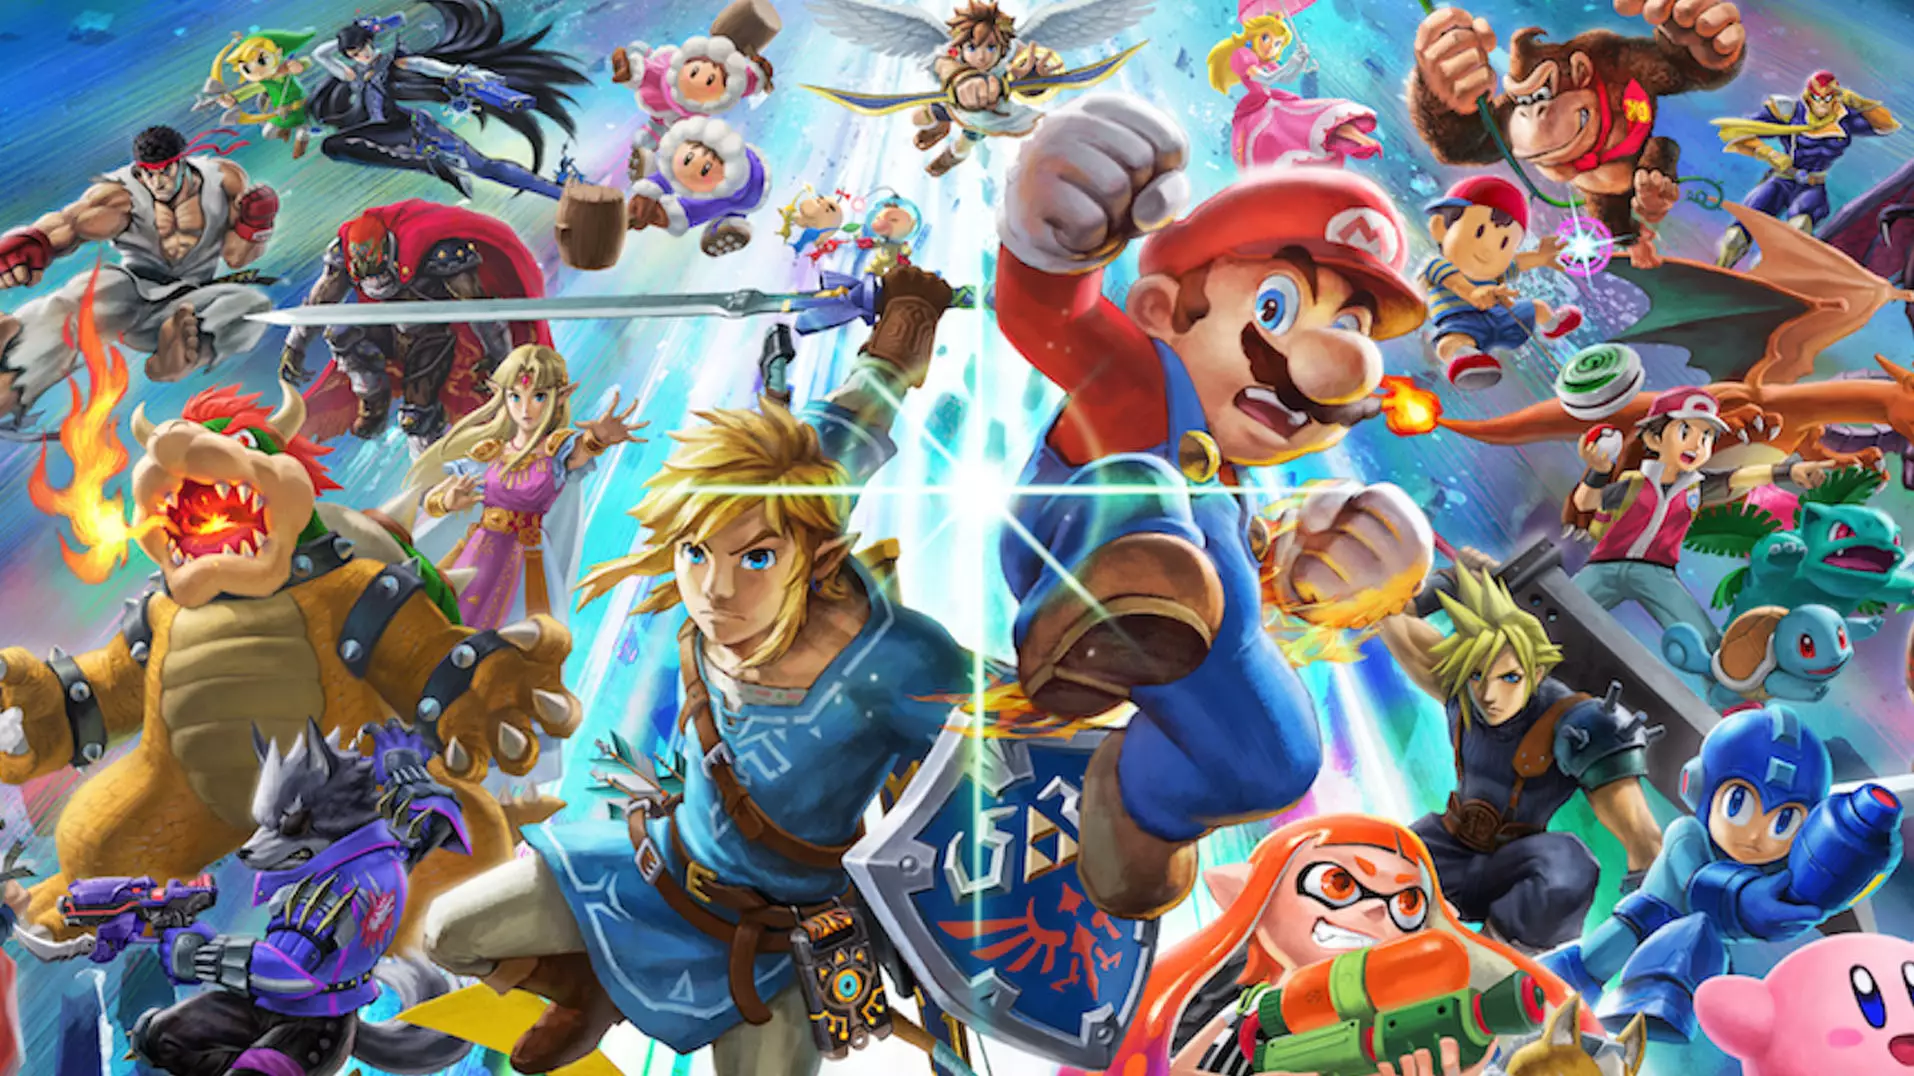 It looks like Super Smash Bros. Ultimate is getting even bigger